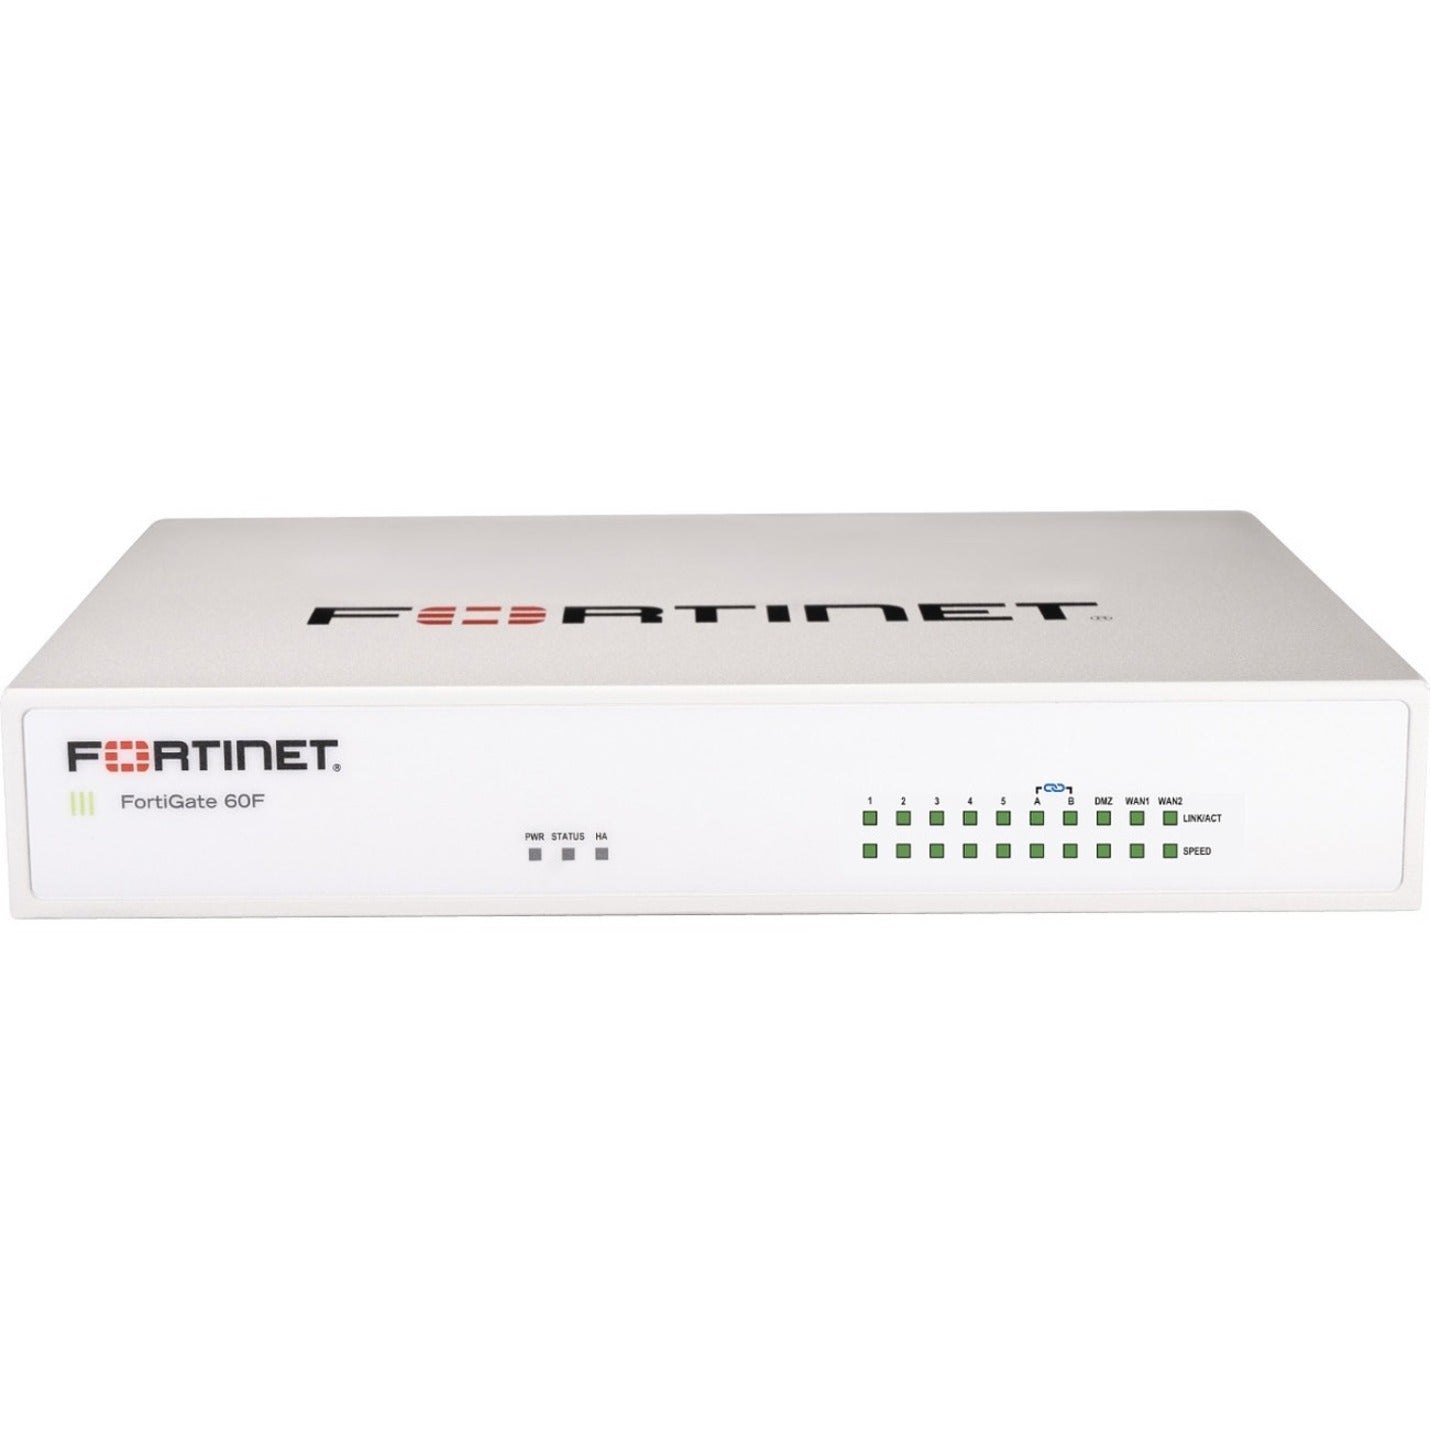 Fortinet FG-61F-BDL-950-12 FortiGate FG-61F Network Security/Firewall Appliance, 10 Ports, 1 Year Hardware Warranty, 24x7 FC & Technical Support